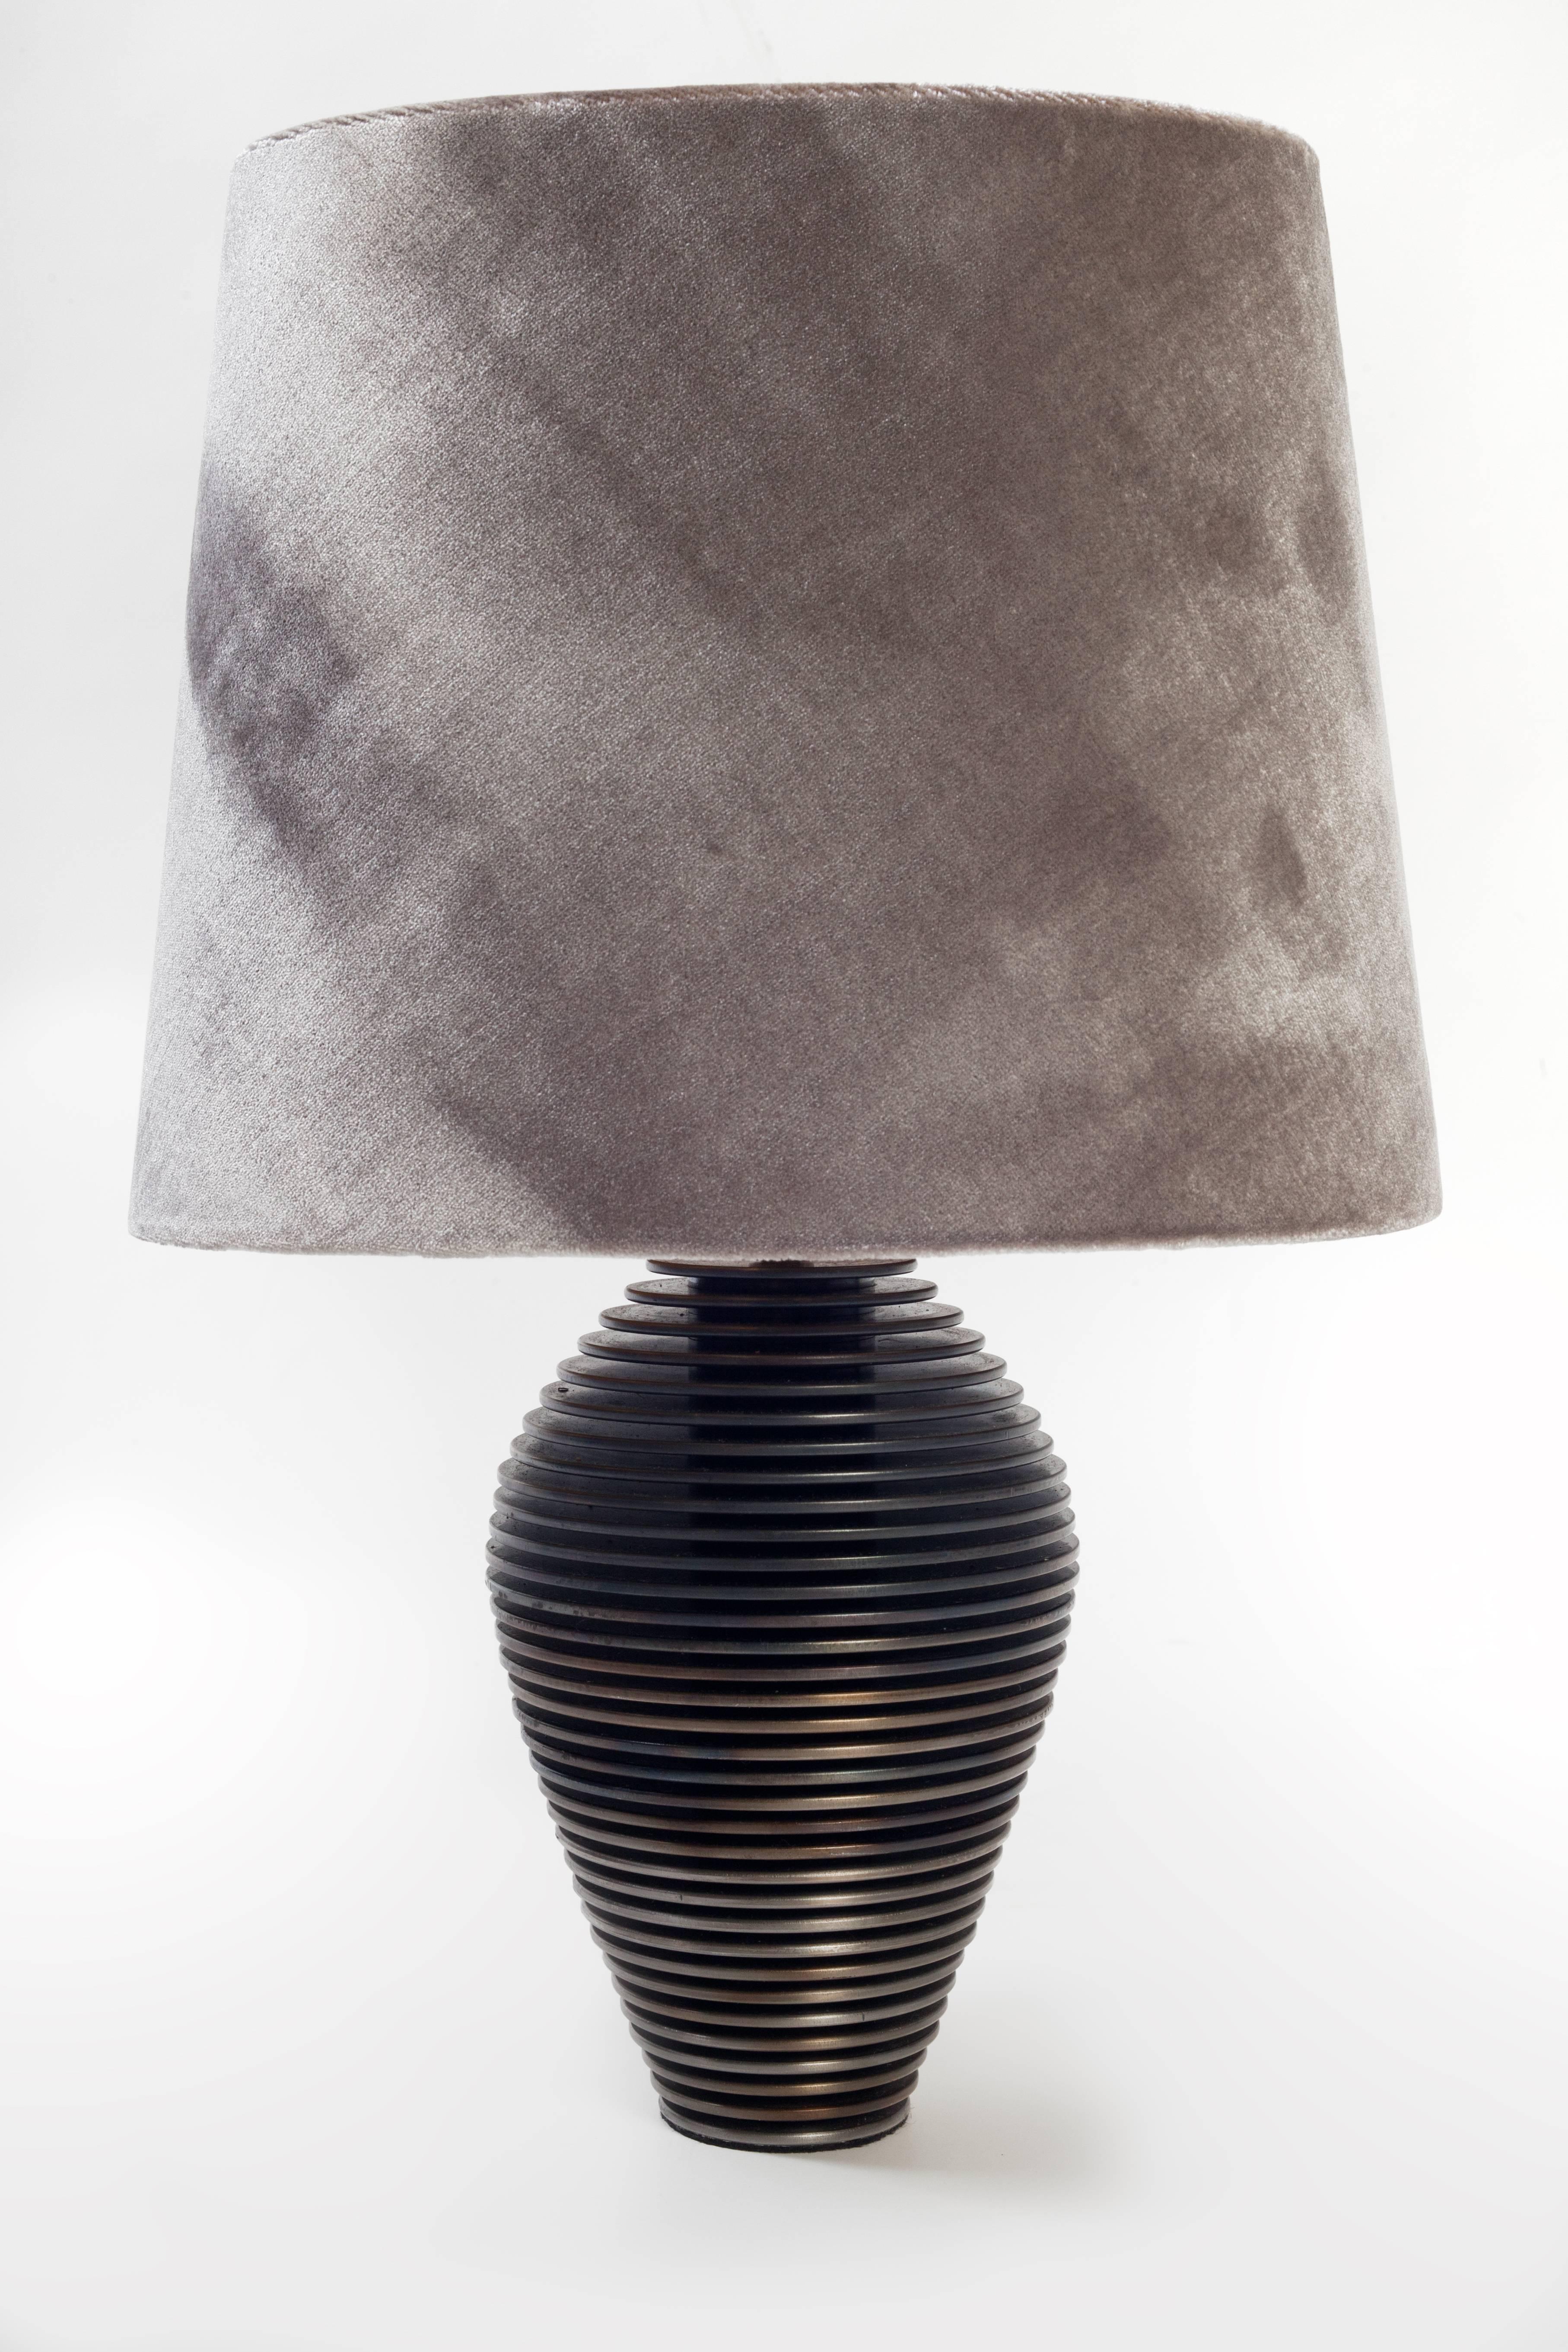 Heavy solid metal base and a elegant shade.
They appear like feminine and masculine.
To be on the the safe side, the lamp should be checked locally by a specialist concerning local requirements.